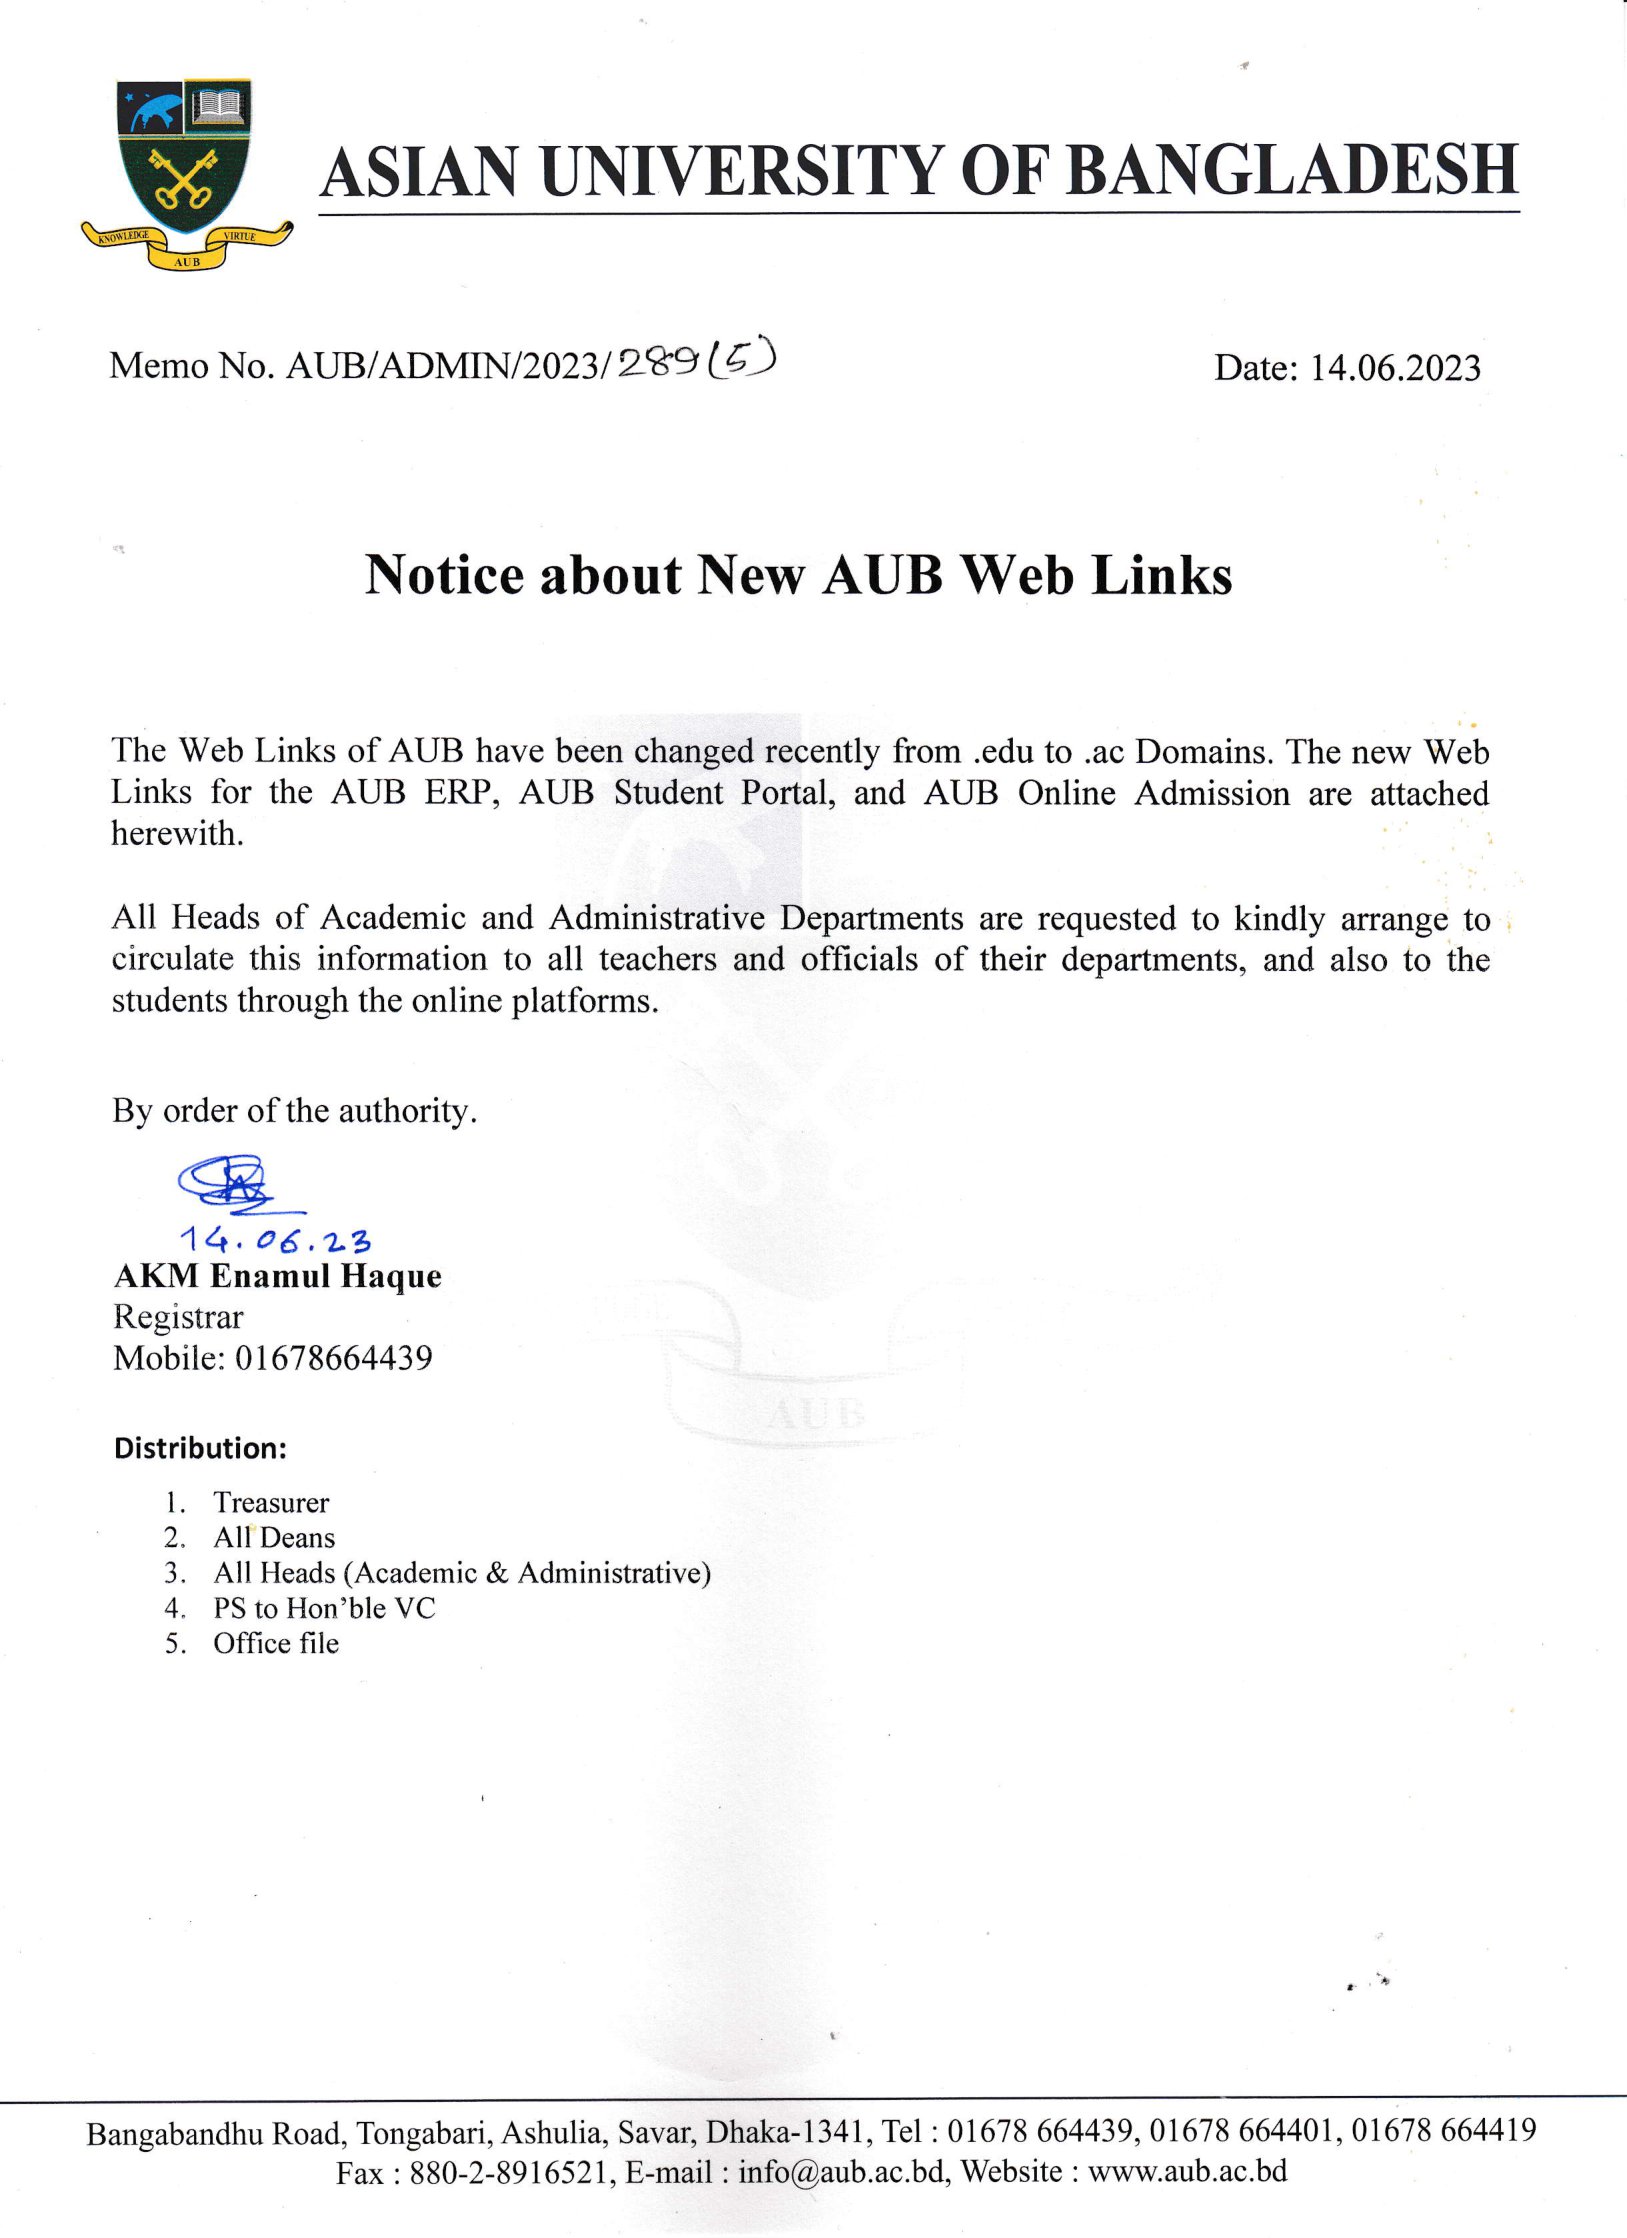 NOTICE ABOUT NEW AUB WEB LINKS image